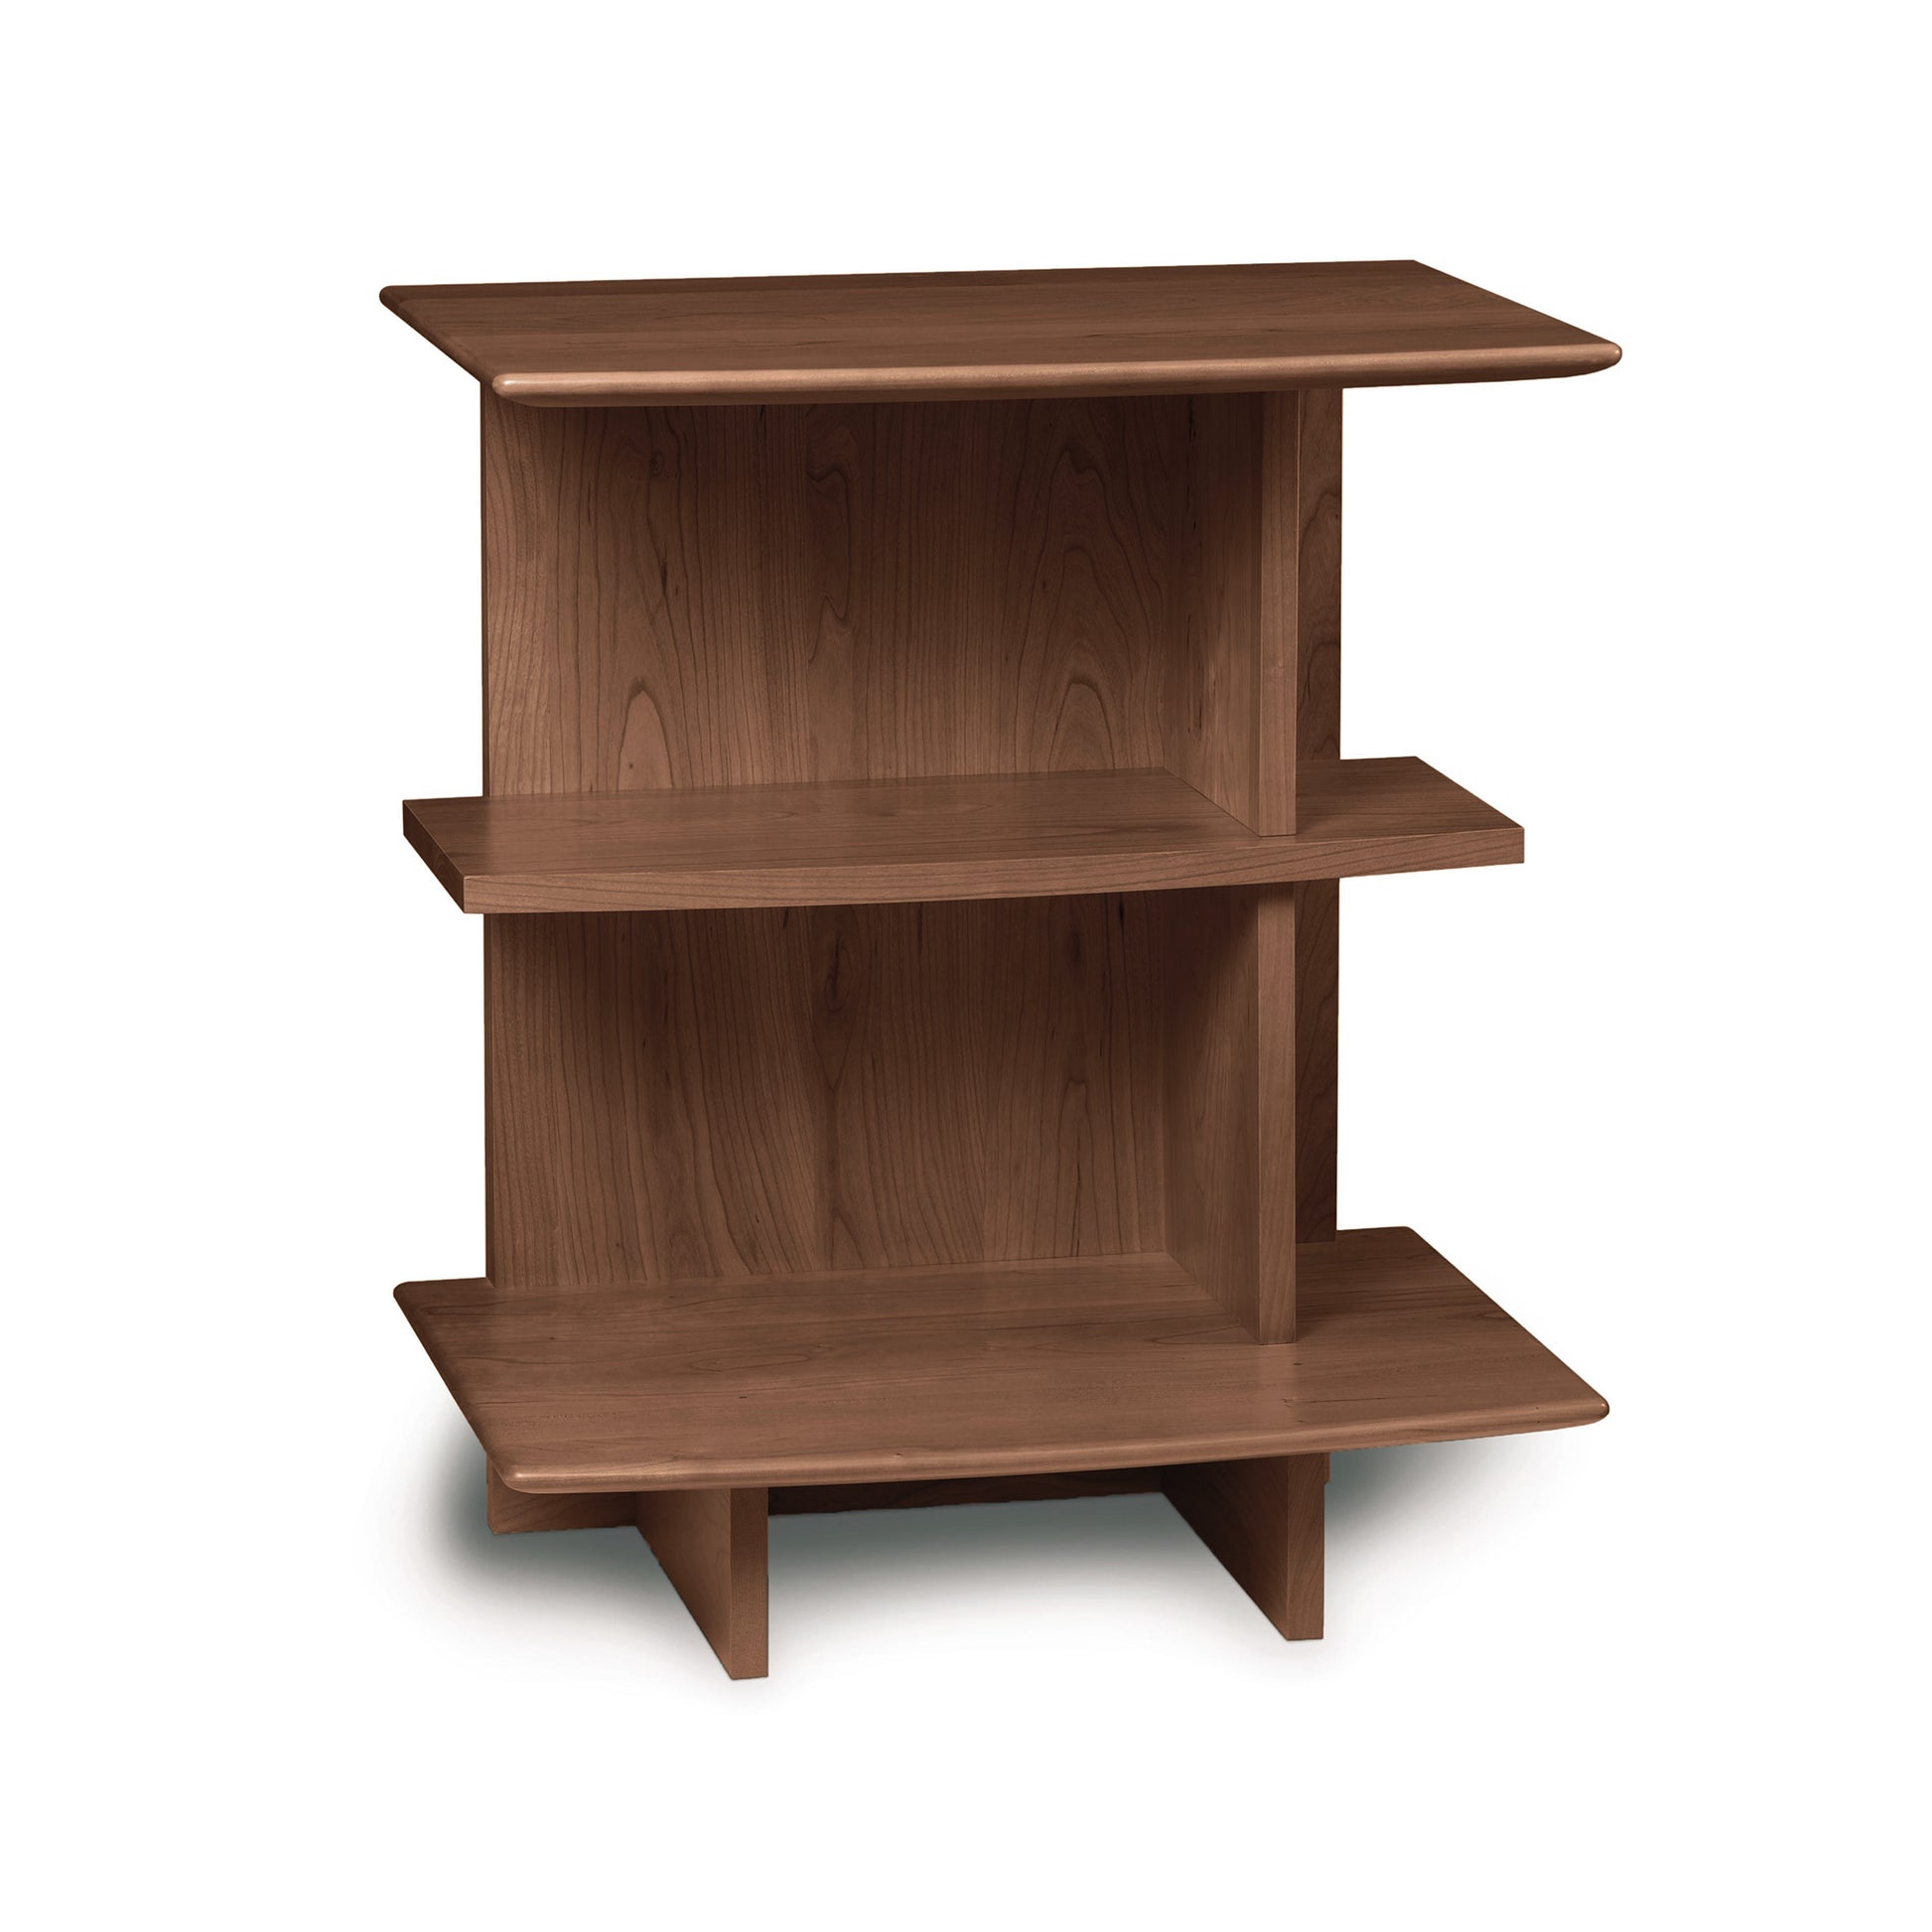 A small wooden shelf on a white background. SEO keywords: Copeland Furniture's Sarah Open Shelf Nightstand.